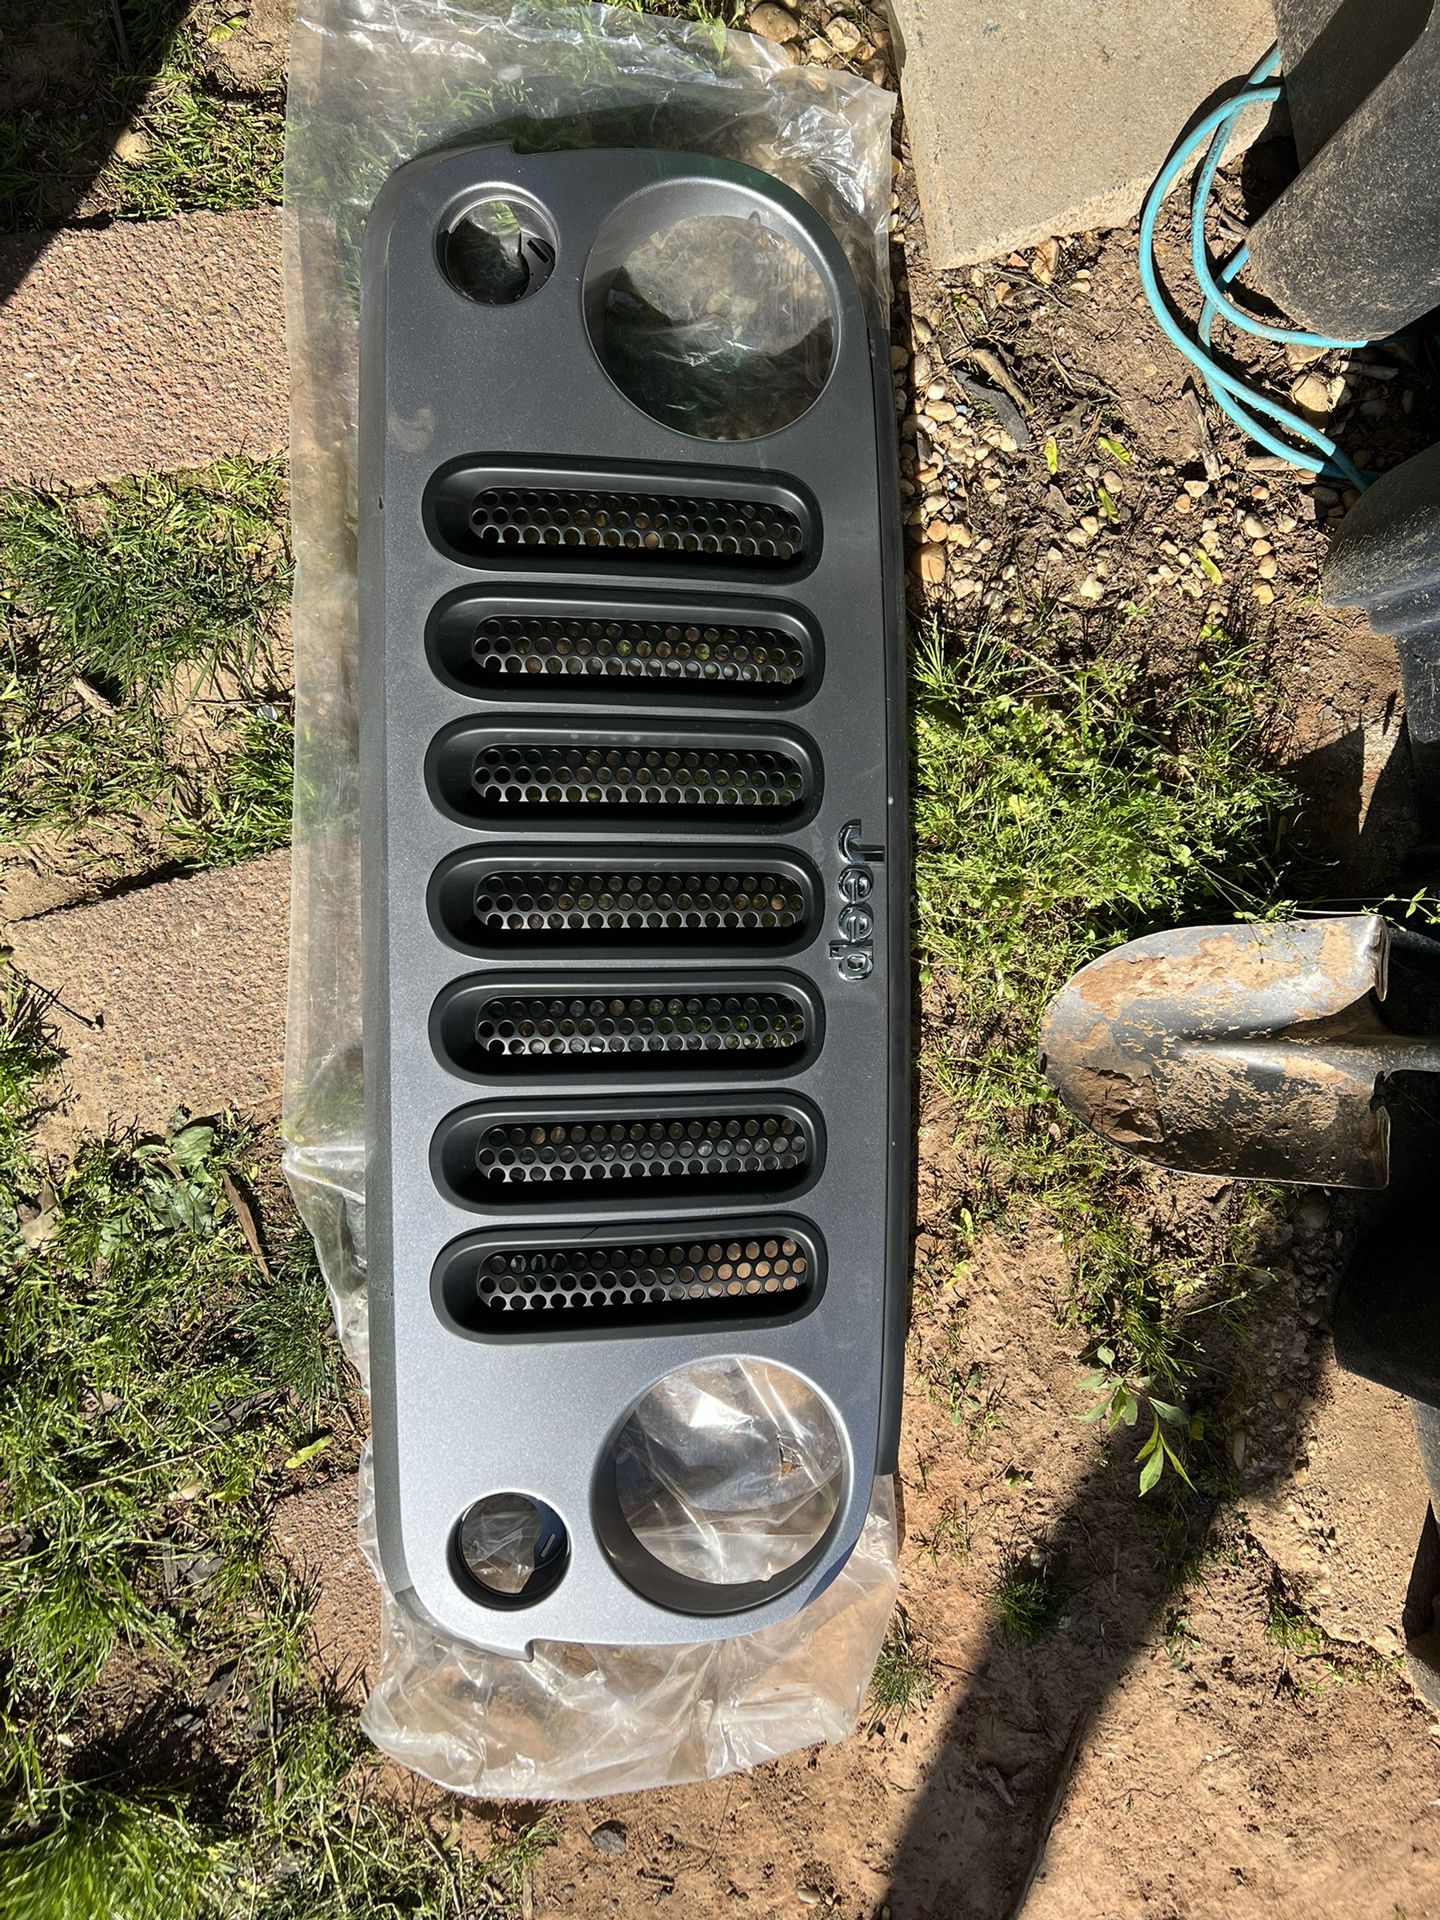 JEEP WRANGLER JK - Factory grill With inserts 